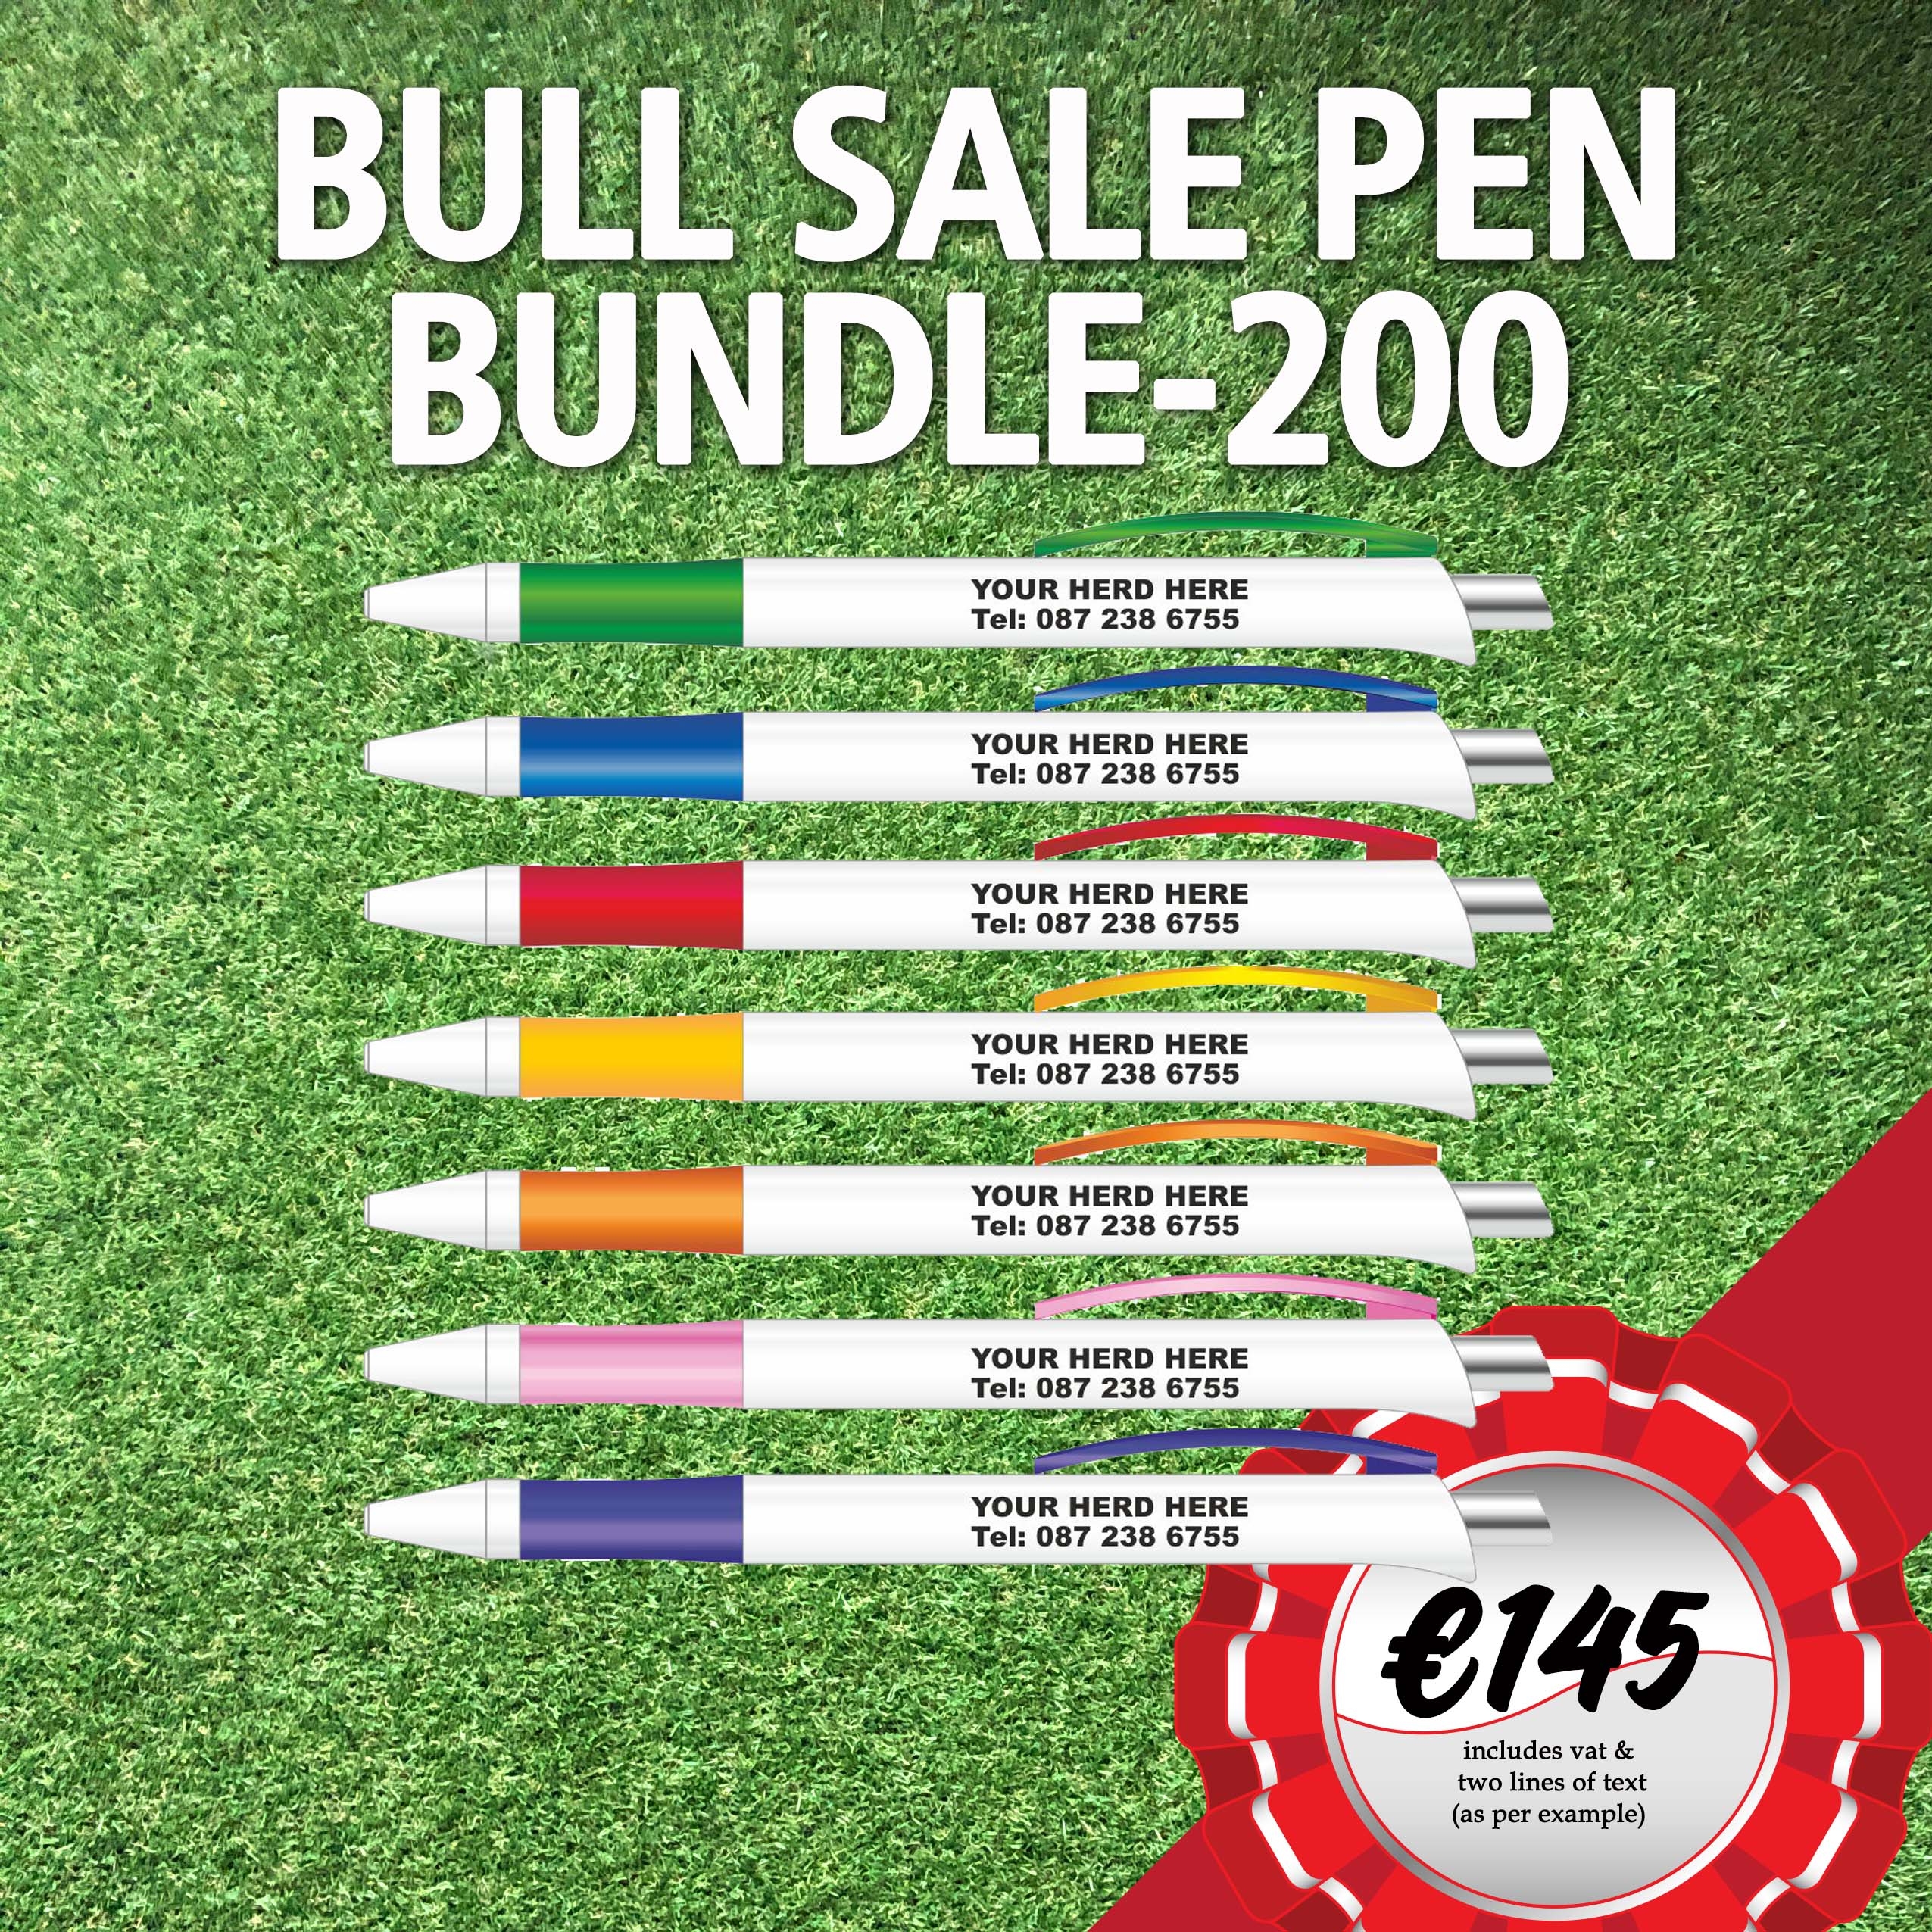 Pedigree Sale Bundle – 200 Pens with your Herd Name & Contact Number